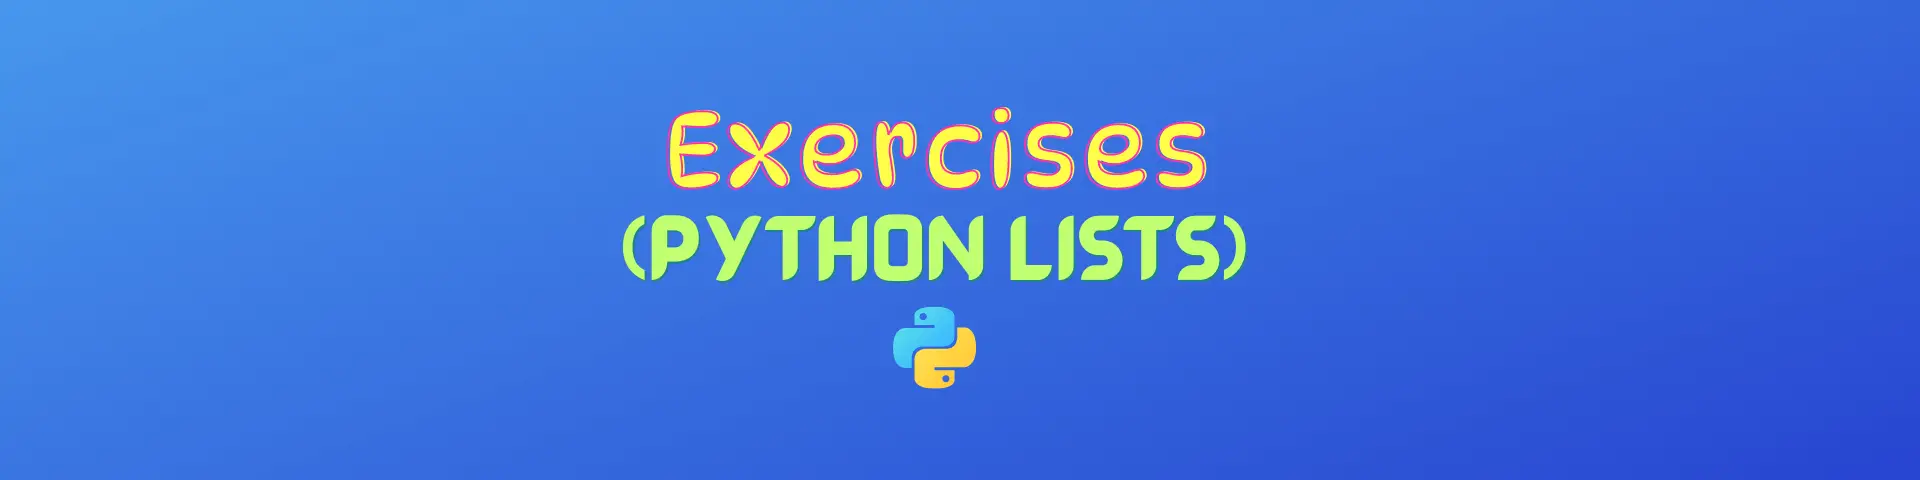 Exercises to practice working with Python Lists